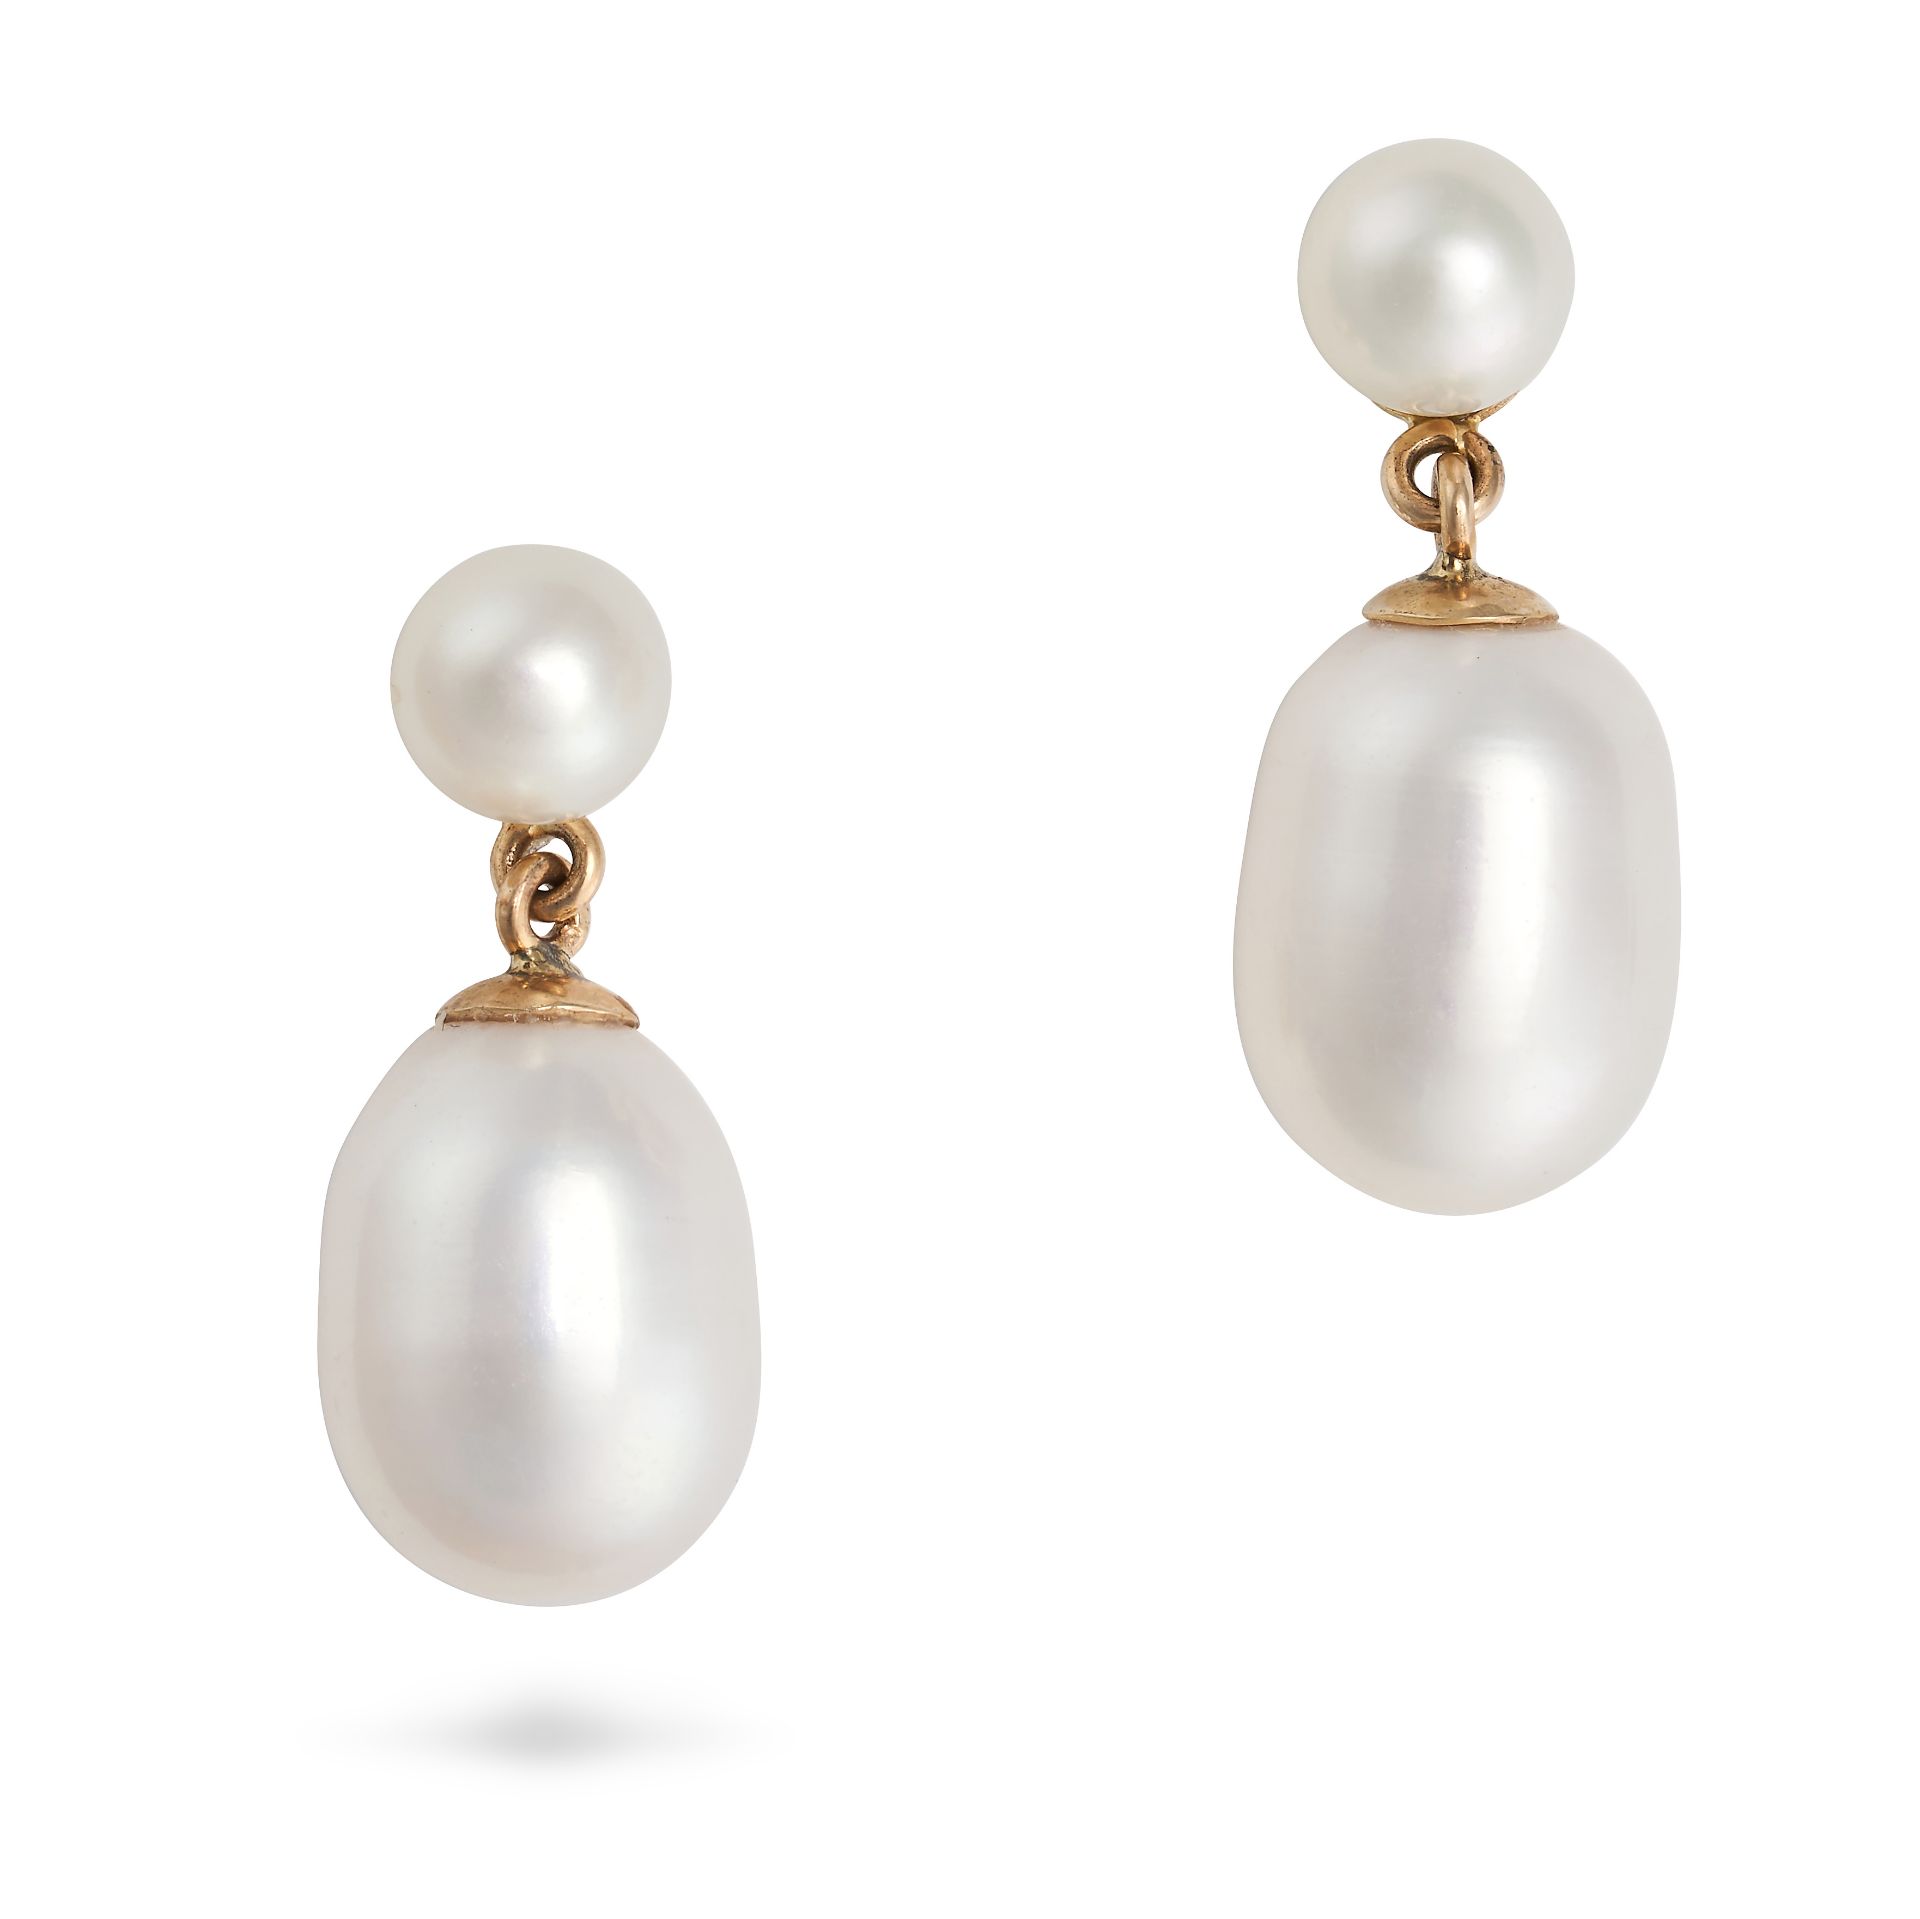 NO RESERVE - A PAIR OF PEARL DROP EARRINGS in yellow gold, each set with a pearl of 5.3mm, suspen...